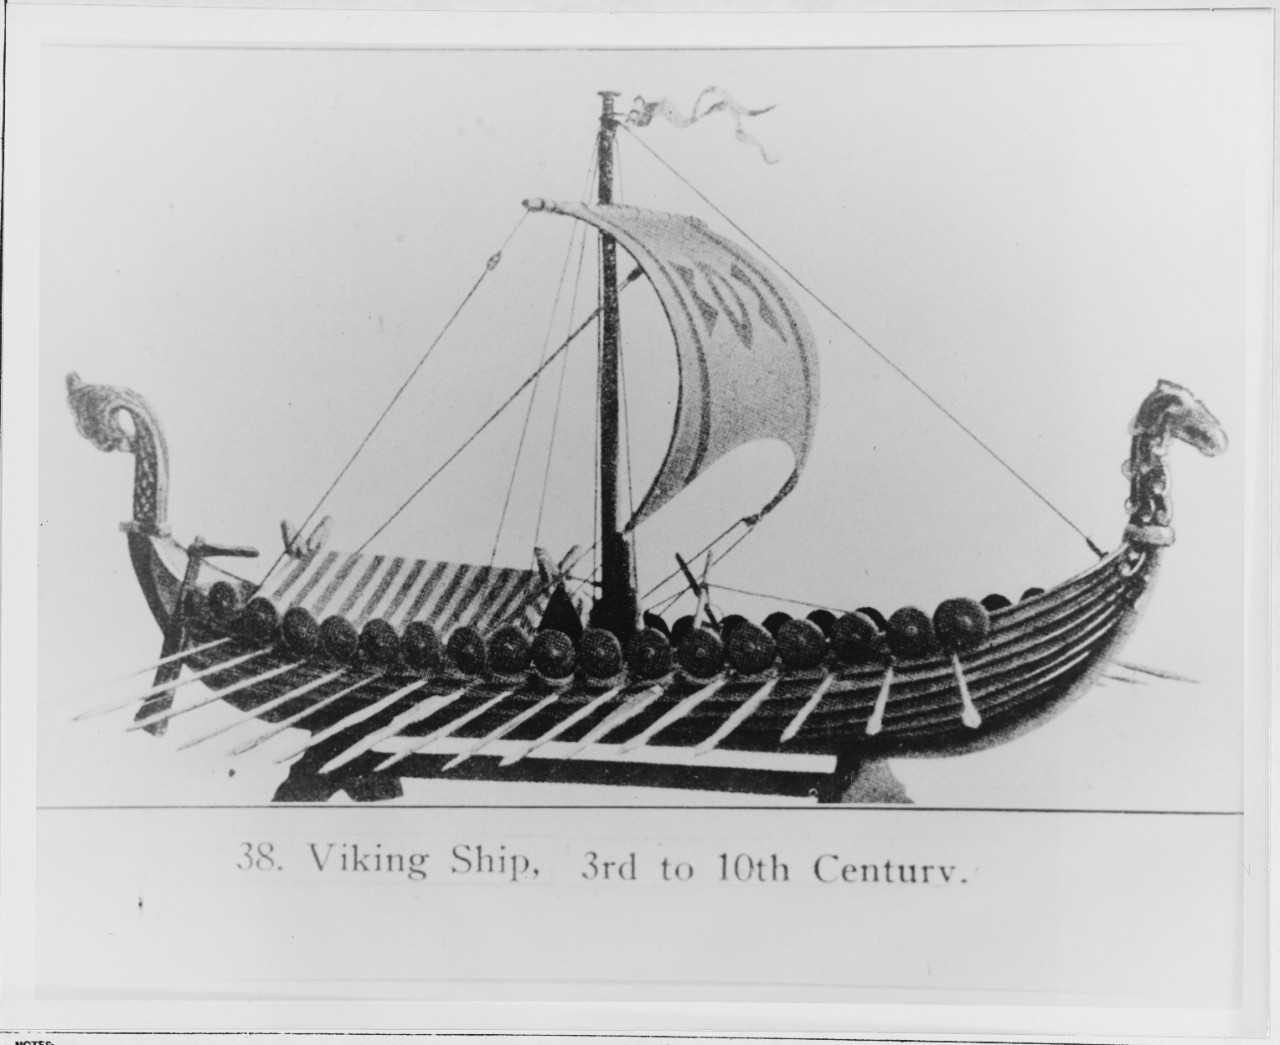 Model of Viking Ship, 3rd to 10th Century